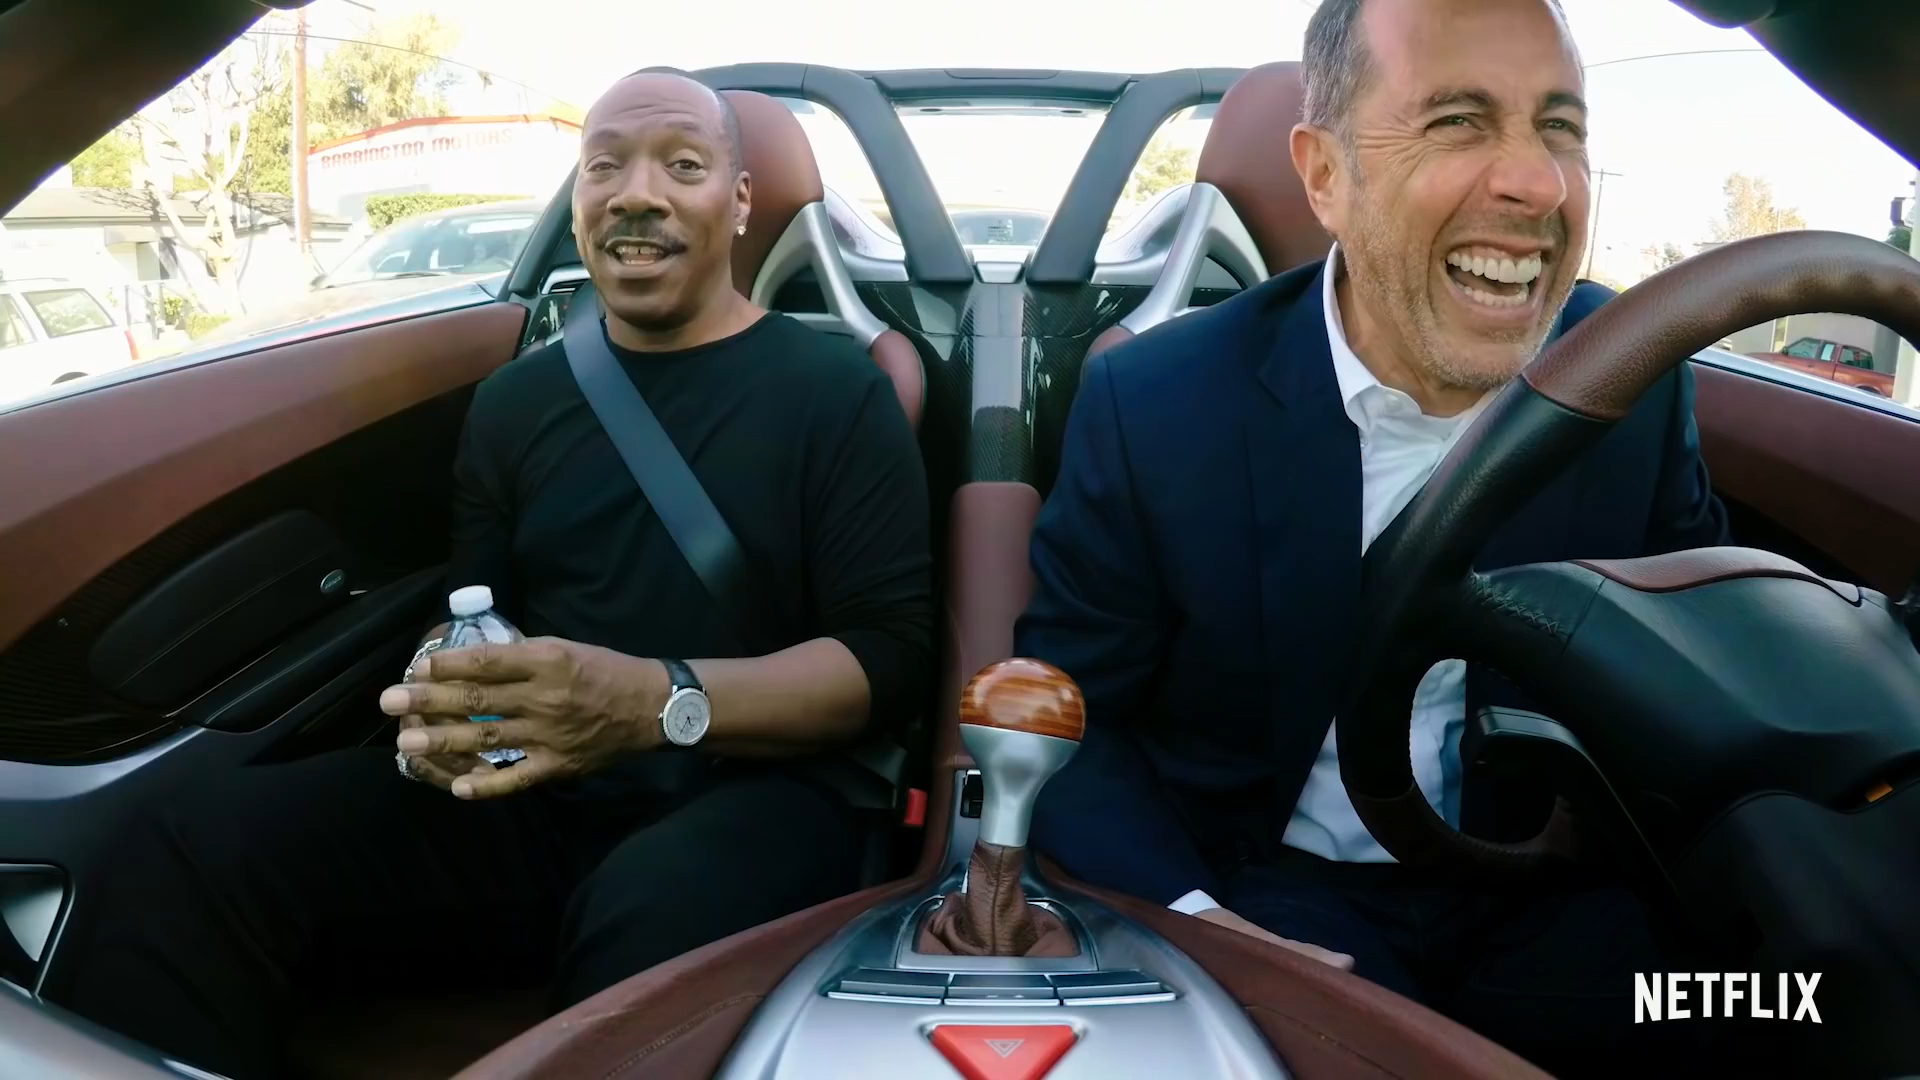 dumb things while high - comedians in cars getting coffee - Netflix